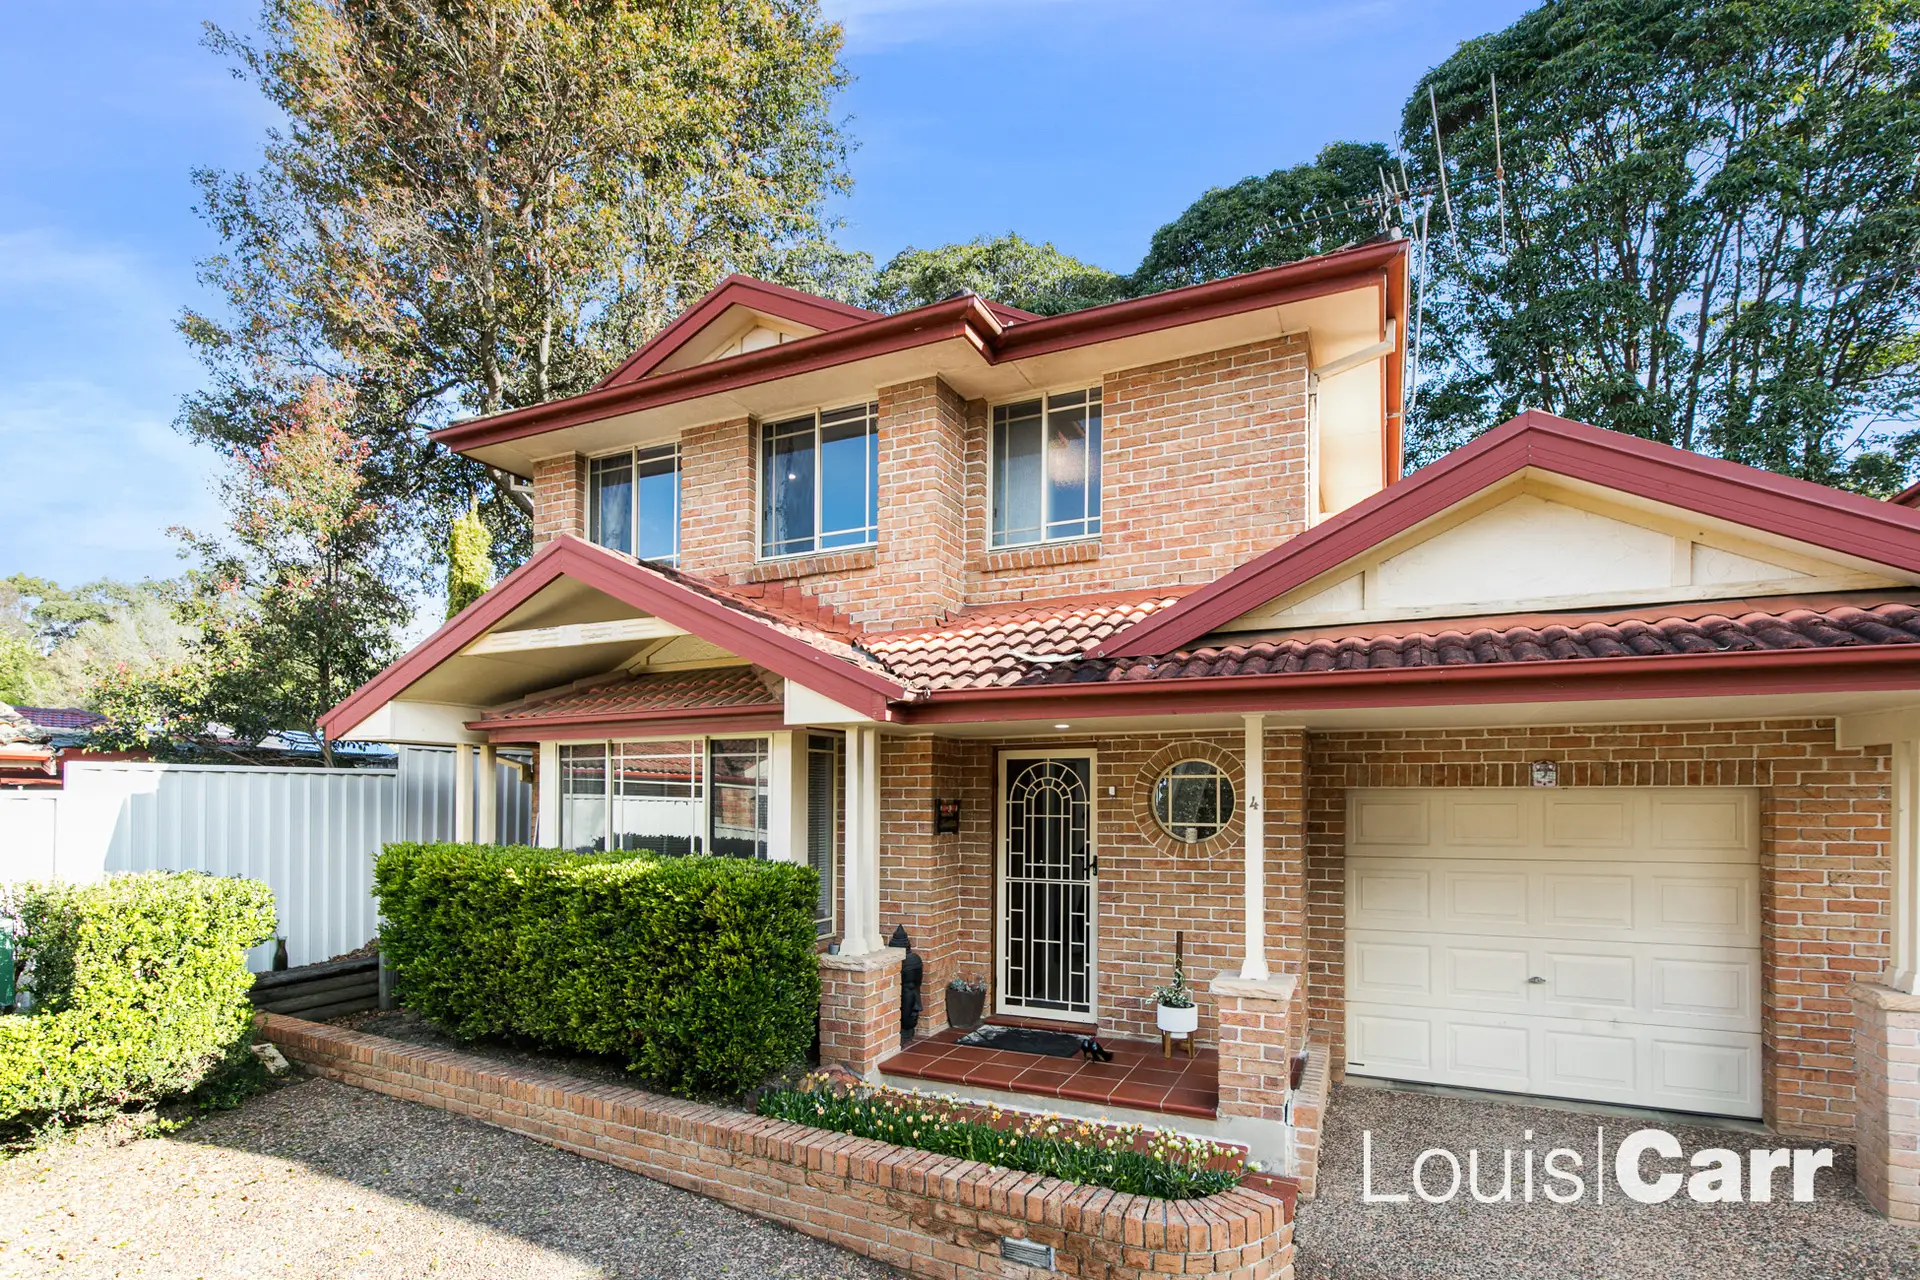 Photo #1: 4/64 Purchase Road, Cherrybrook - Sold by Louis Carr Real Estate